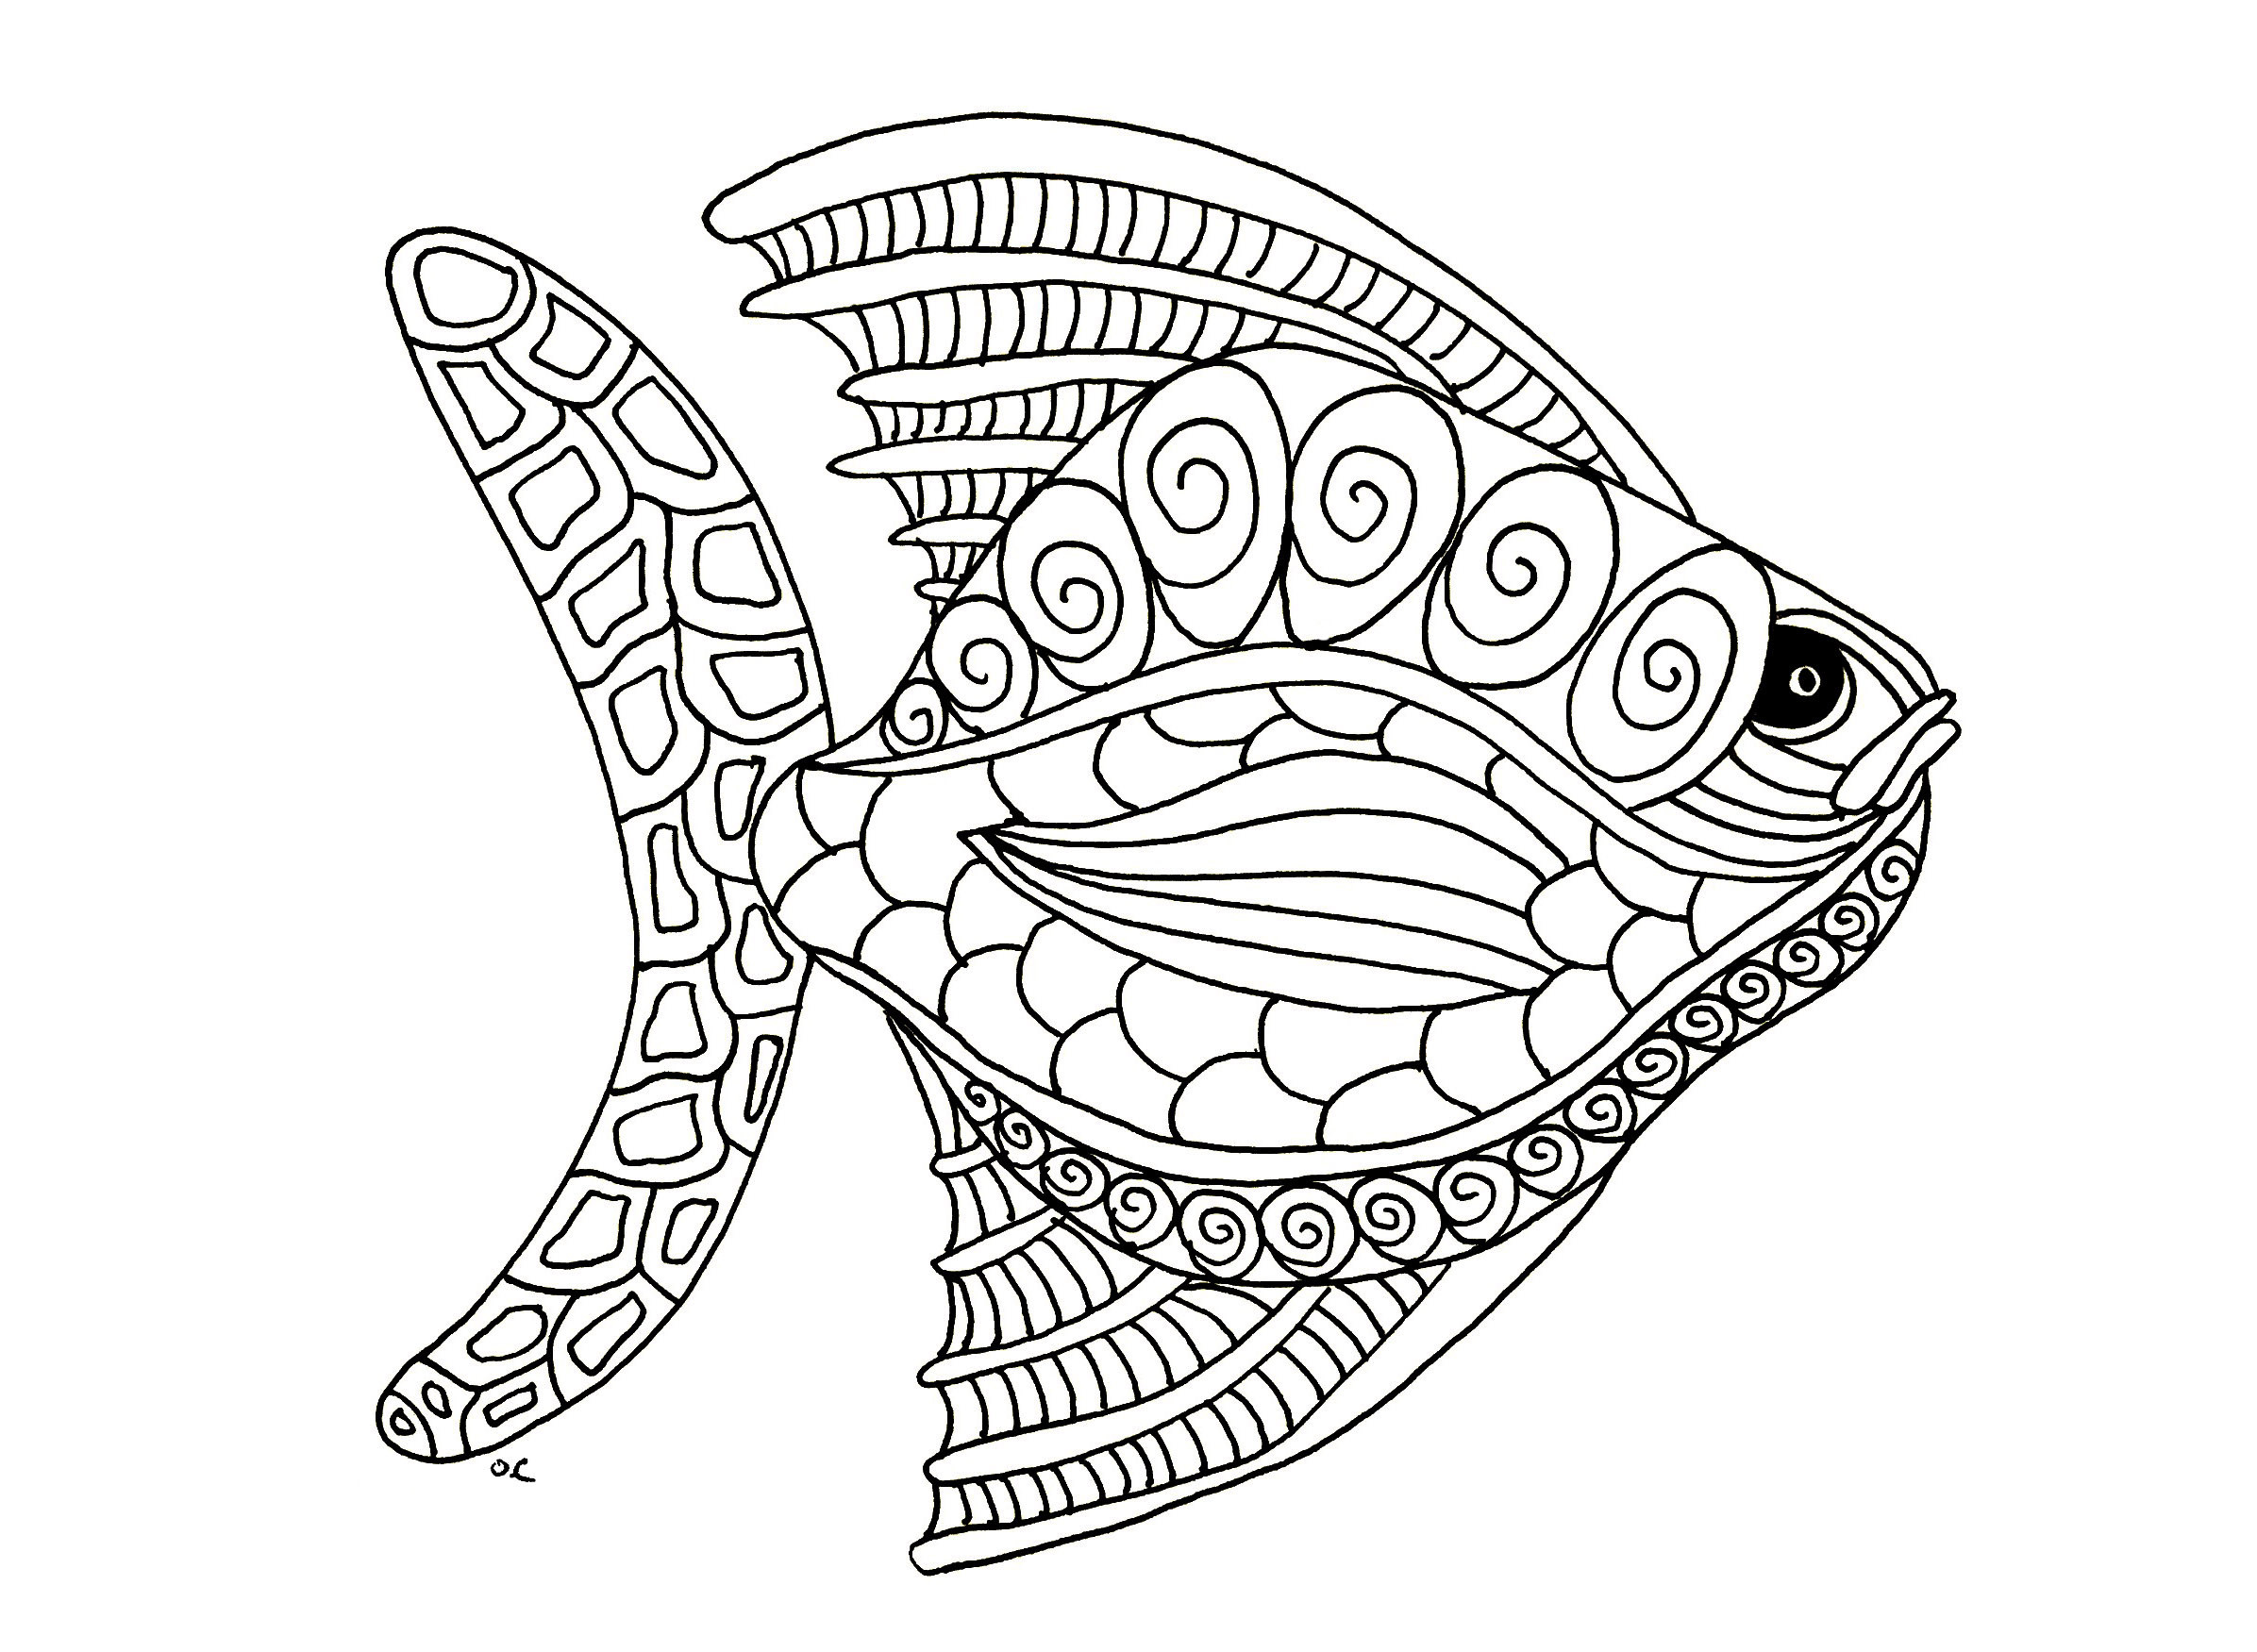 Fish Adult Coloring Pages
 Adult Coloring Pages Animals Best Coloring Pages For Kids